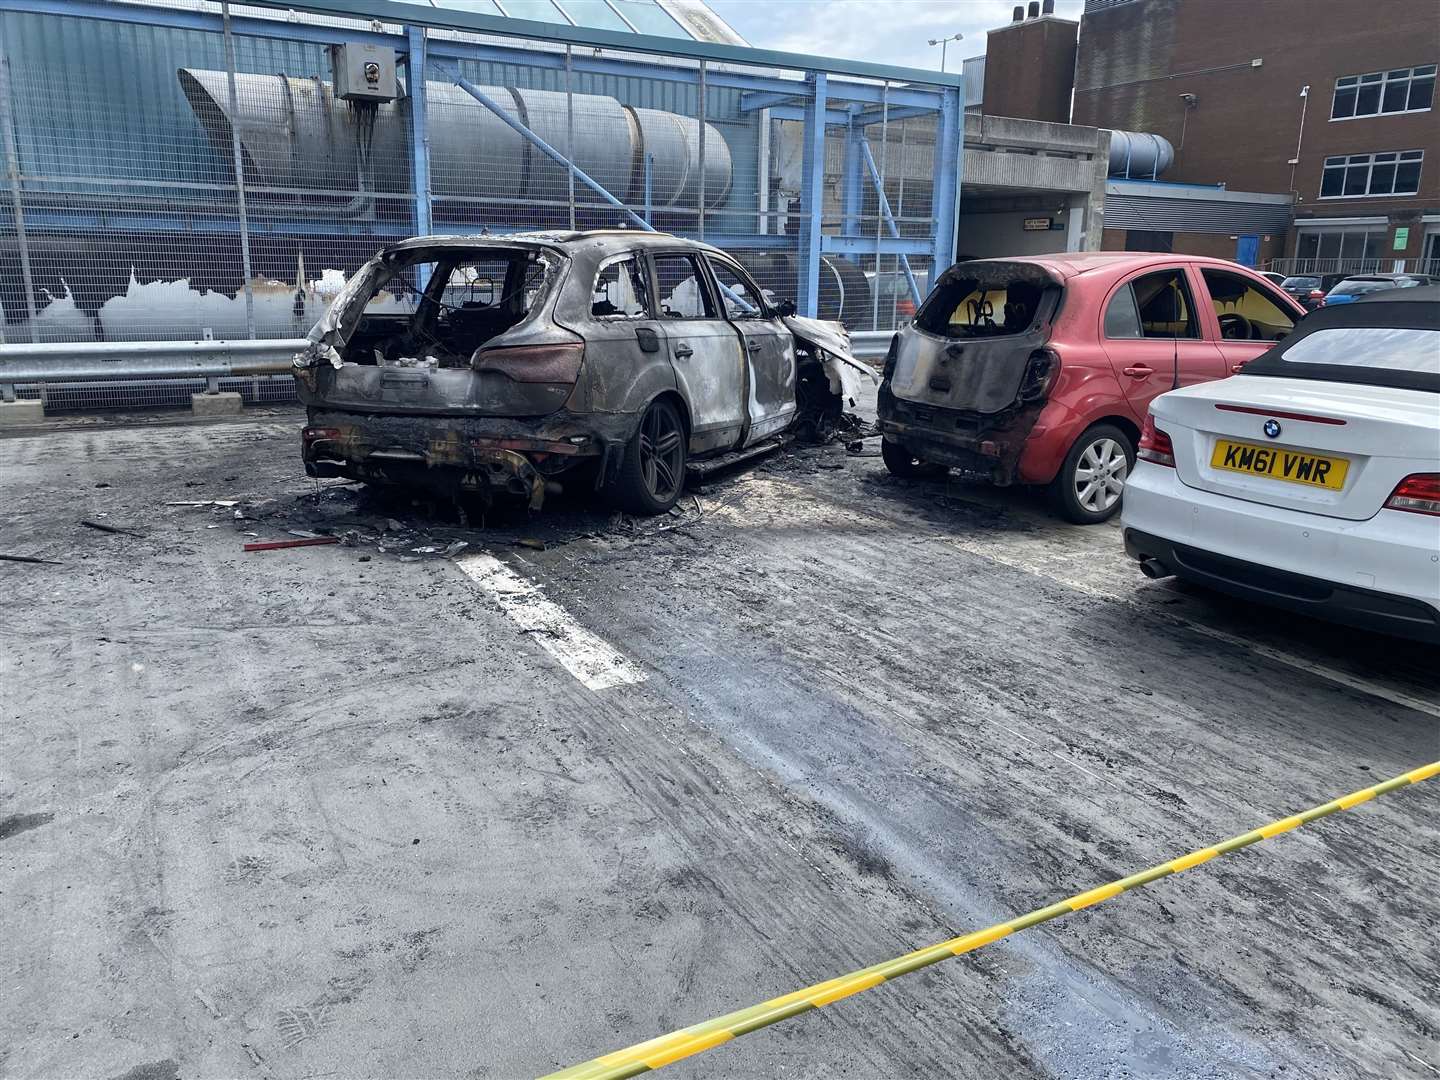 The burnt-out Audi and damaged Micra